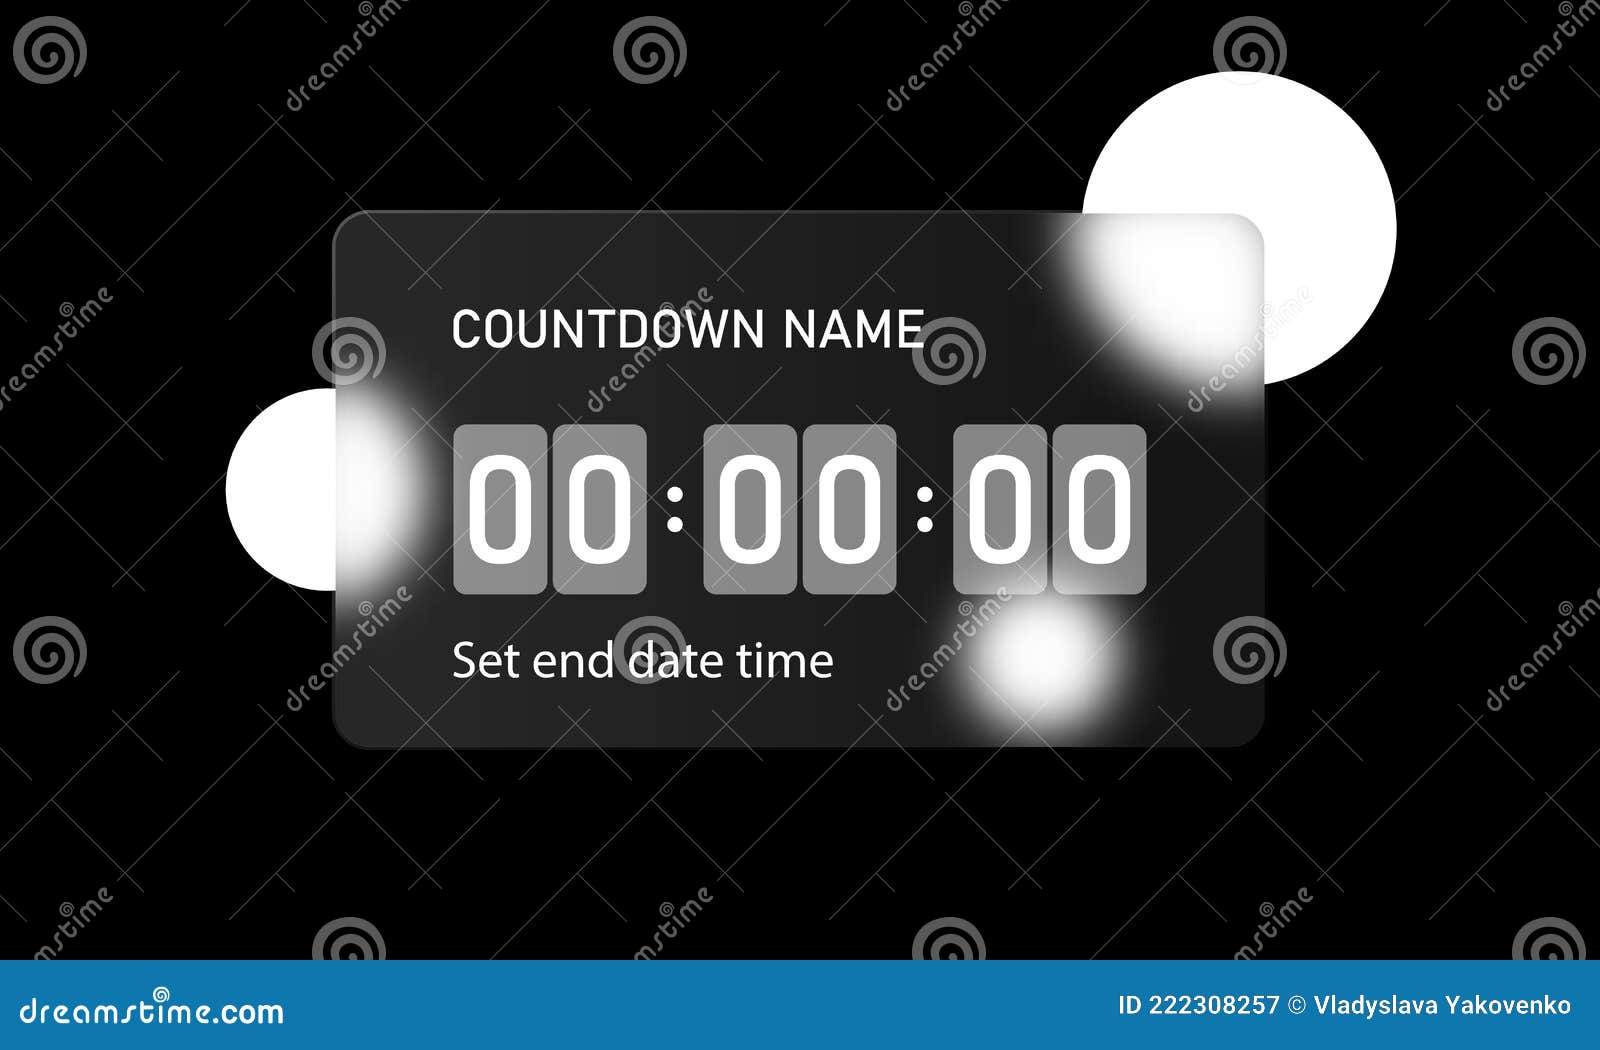 https://thumbs.dreamstime.com/z/glassmorphism-style-countdown-timer-counter-icon-remaining-realistic-glass-morphism-effect-set-transparent-plates-vector-222308257.jpg